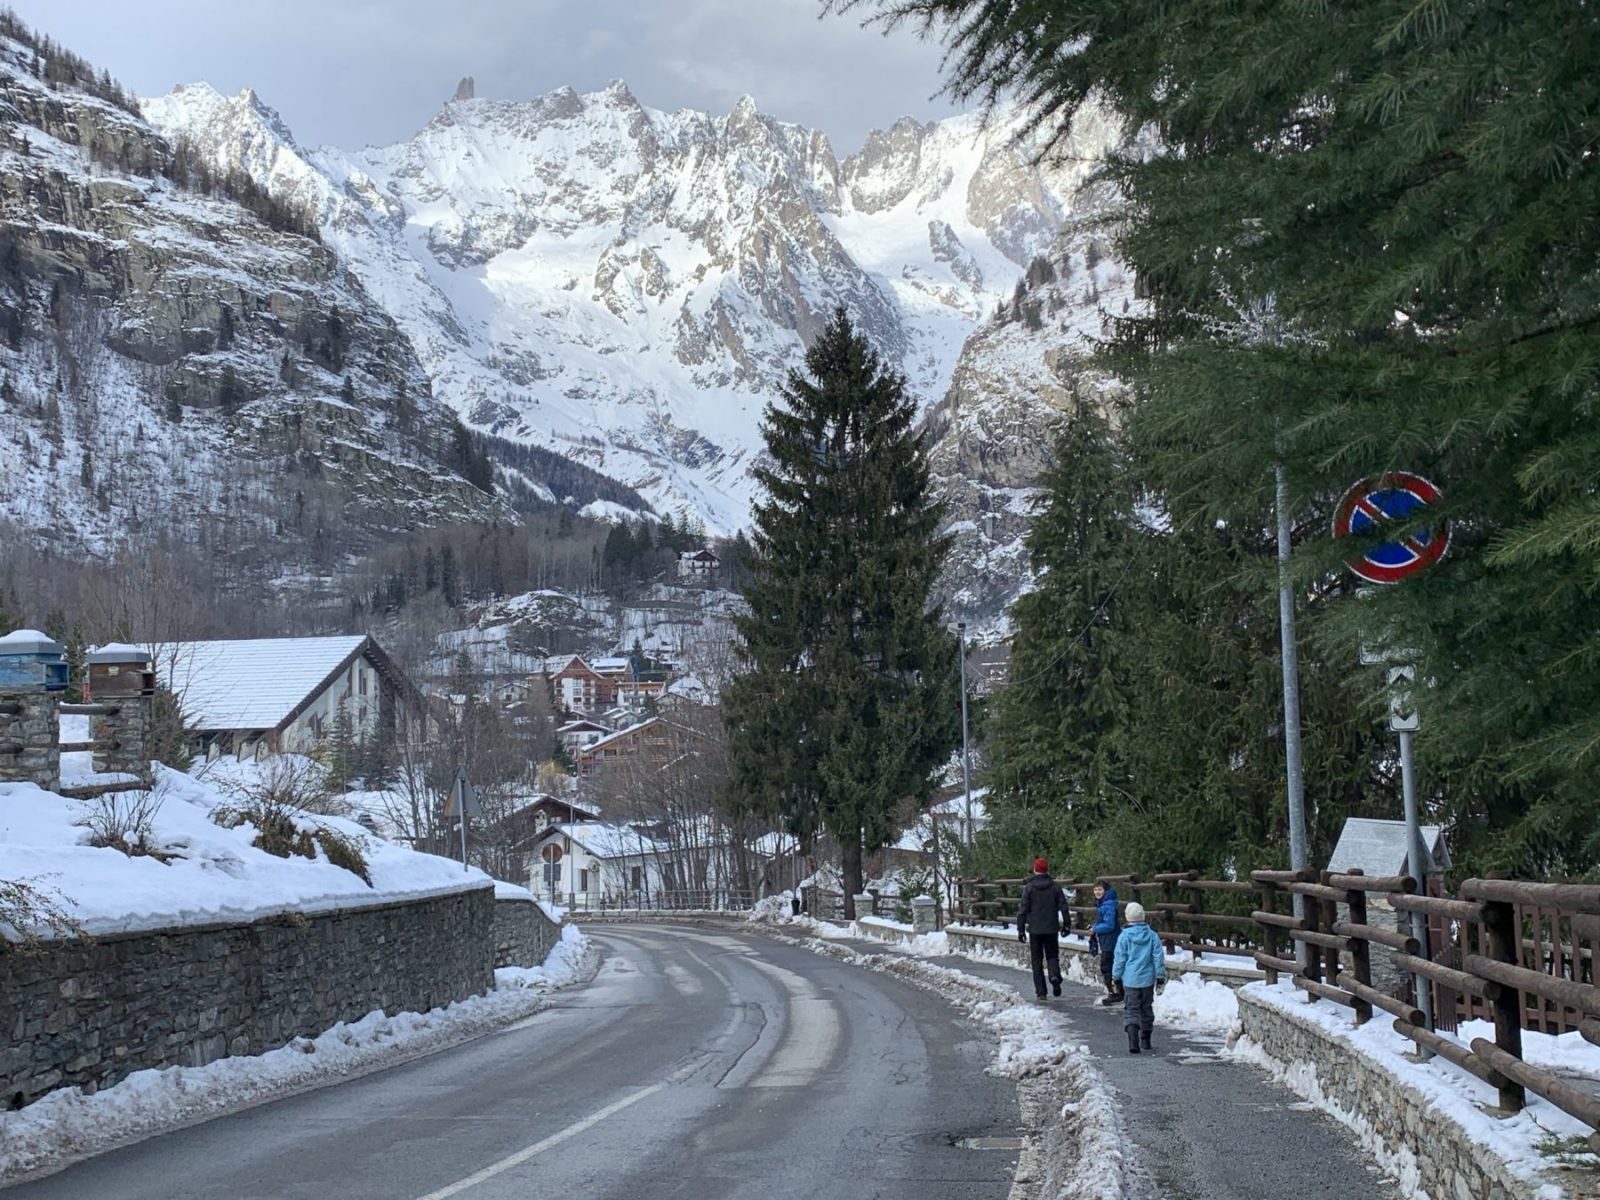 Walking from Dolone to Courmayeur. The scenery is amazing. Our Christmas holidays in the mountains with the kids and our dog! Courmayeur, Aosta.